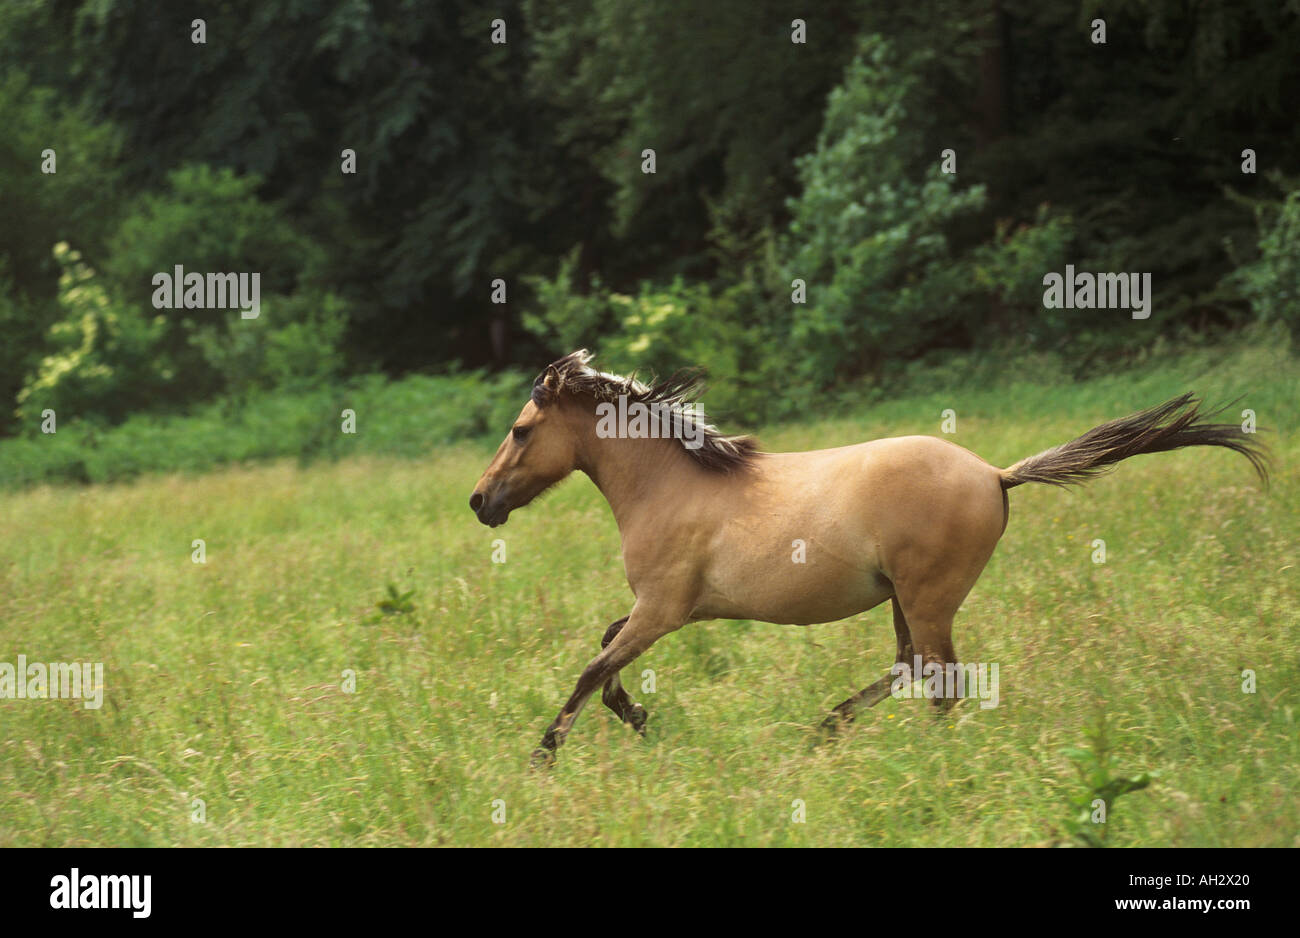 Duelmener - Wild horse running on meadow Banque D'Images